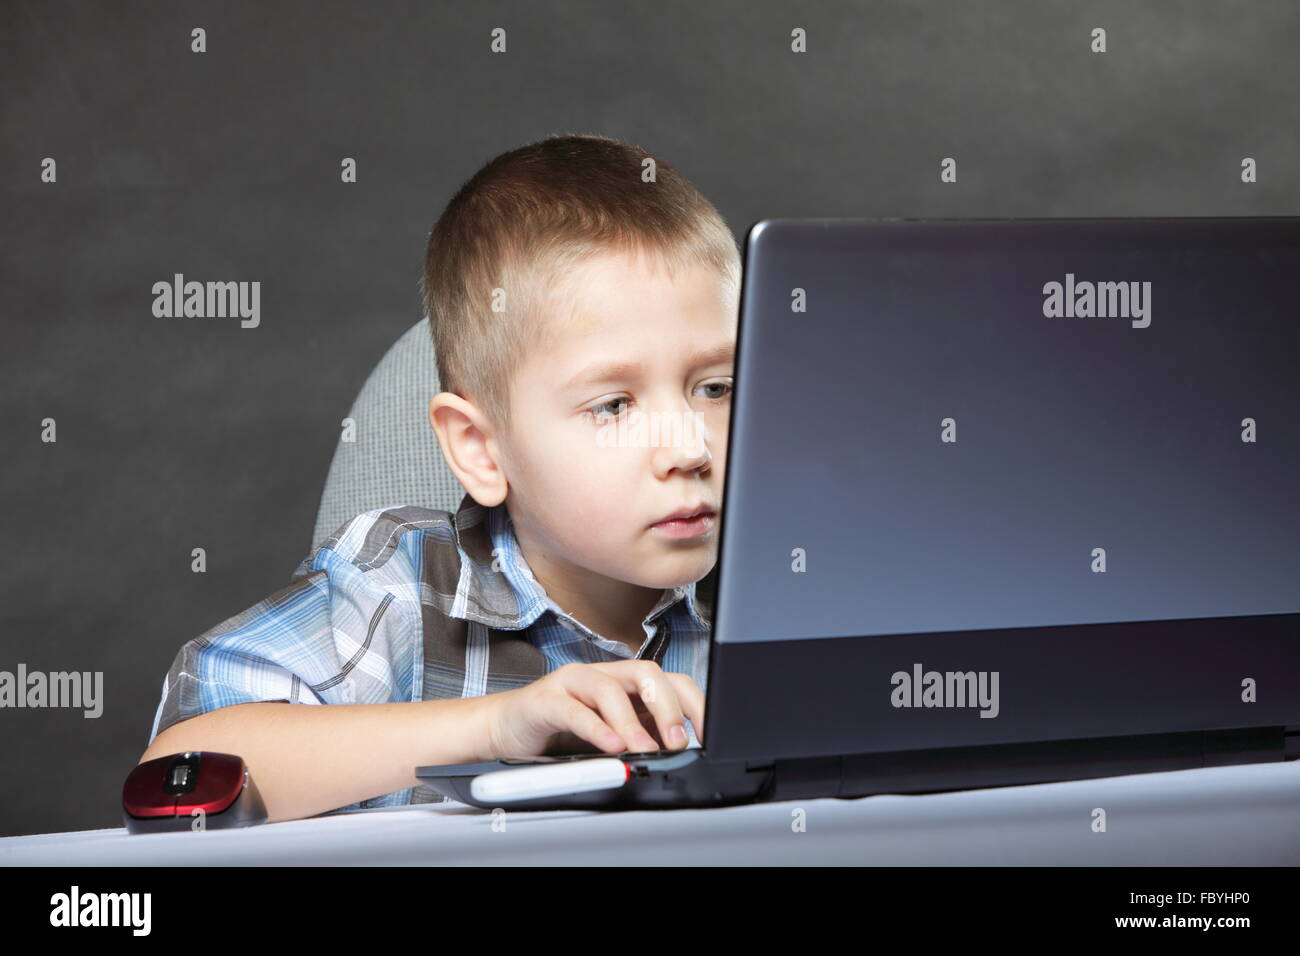 Computer addiction child with laptop notebook Stock Photo